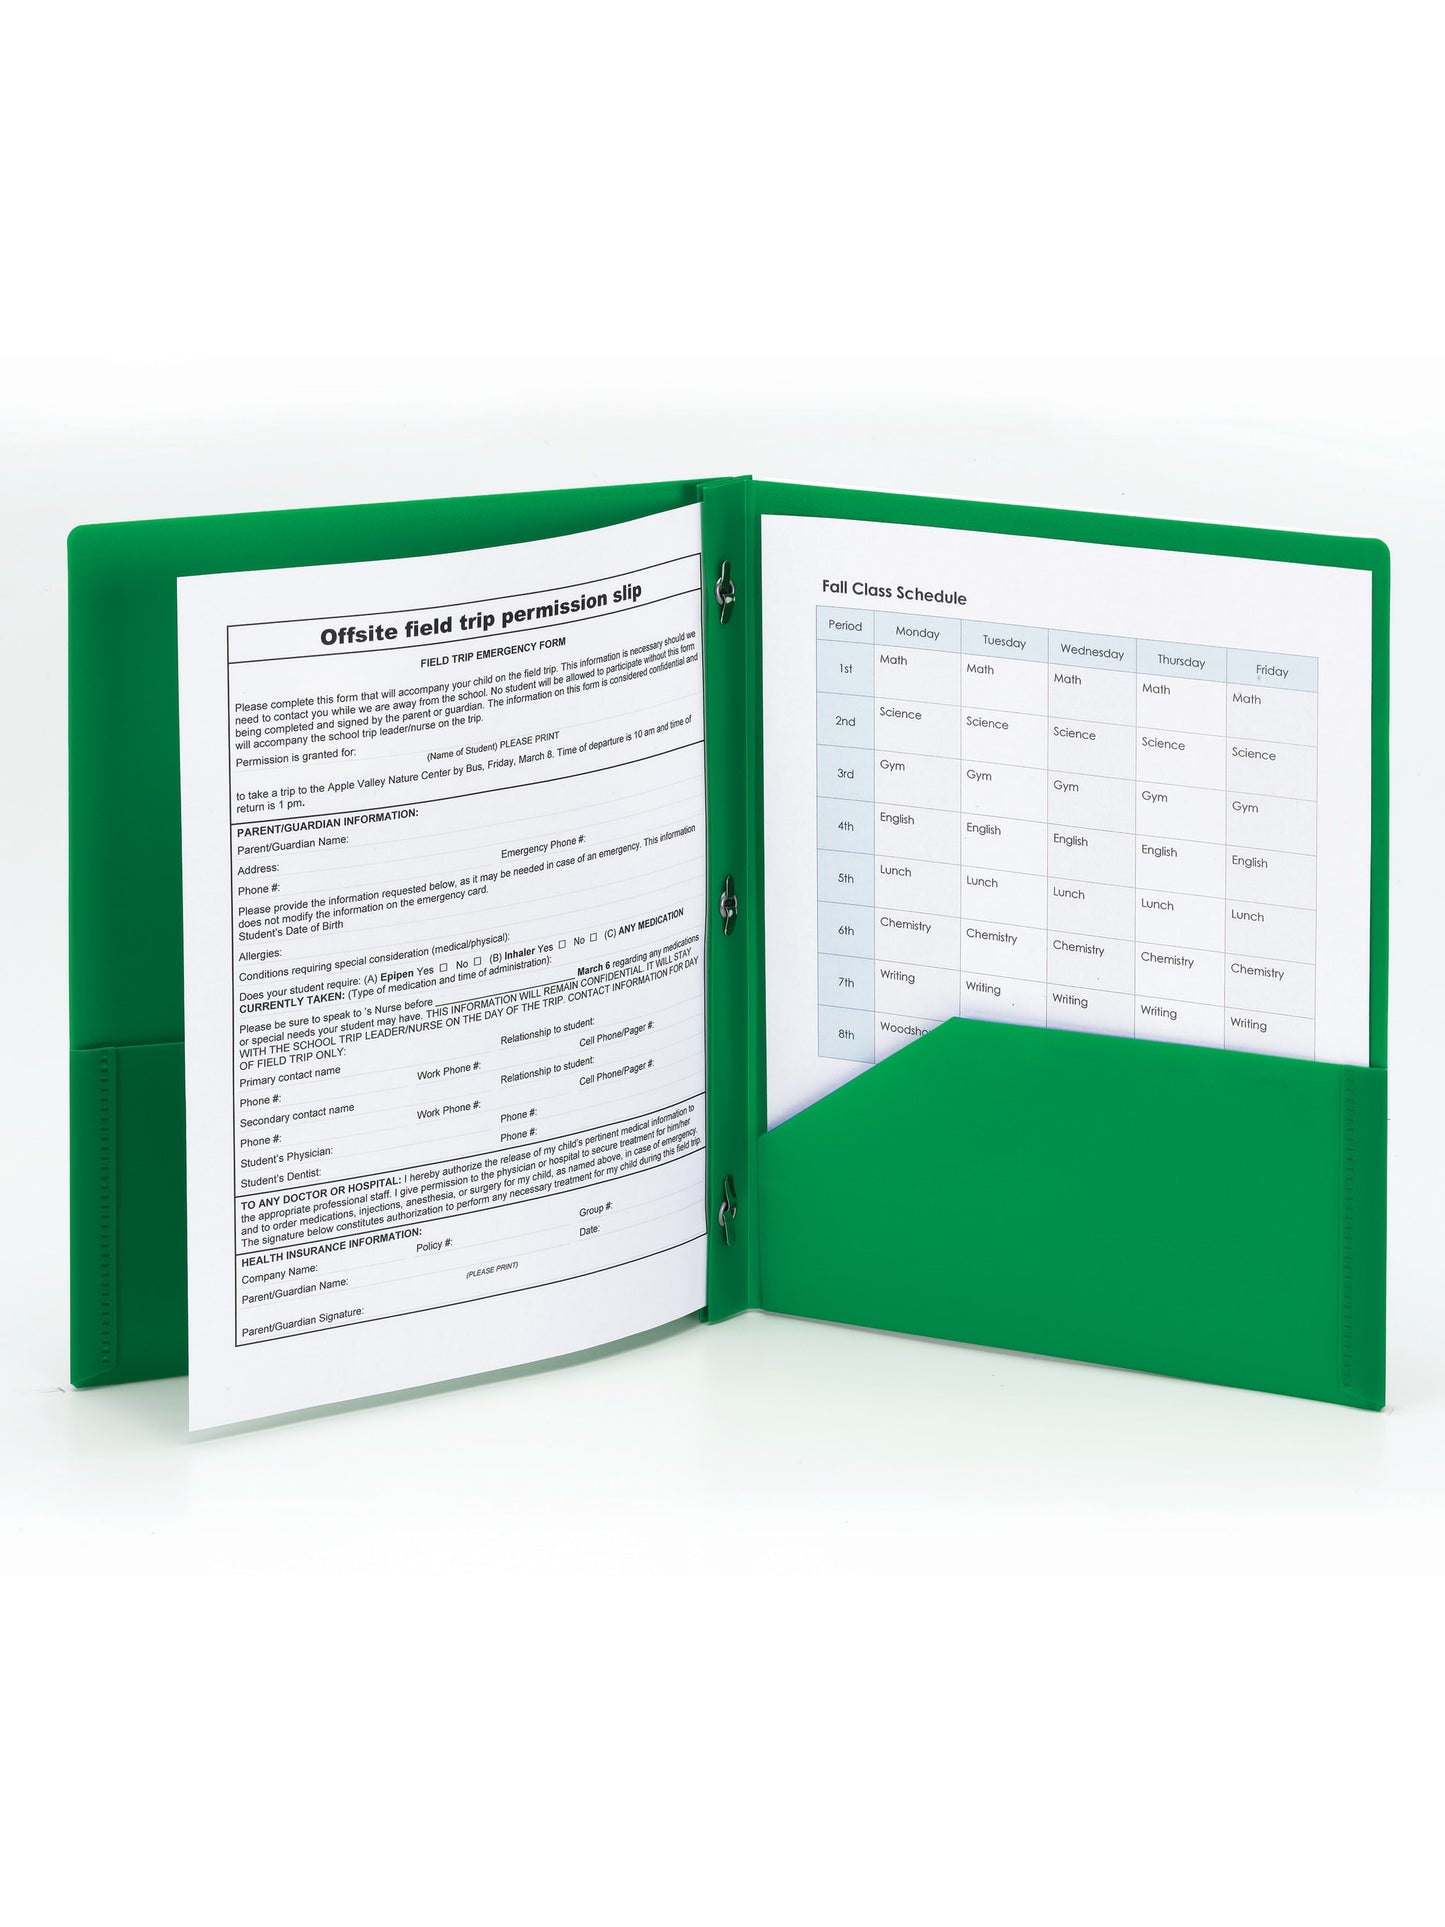 Poly Two-Pocket Folders with Fasteners, Green Color, Letter Size, Set of 1, 086486877329